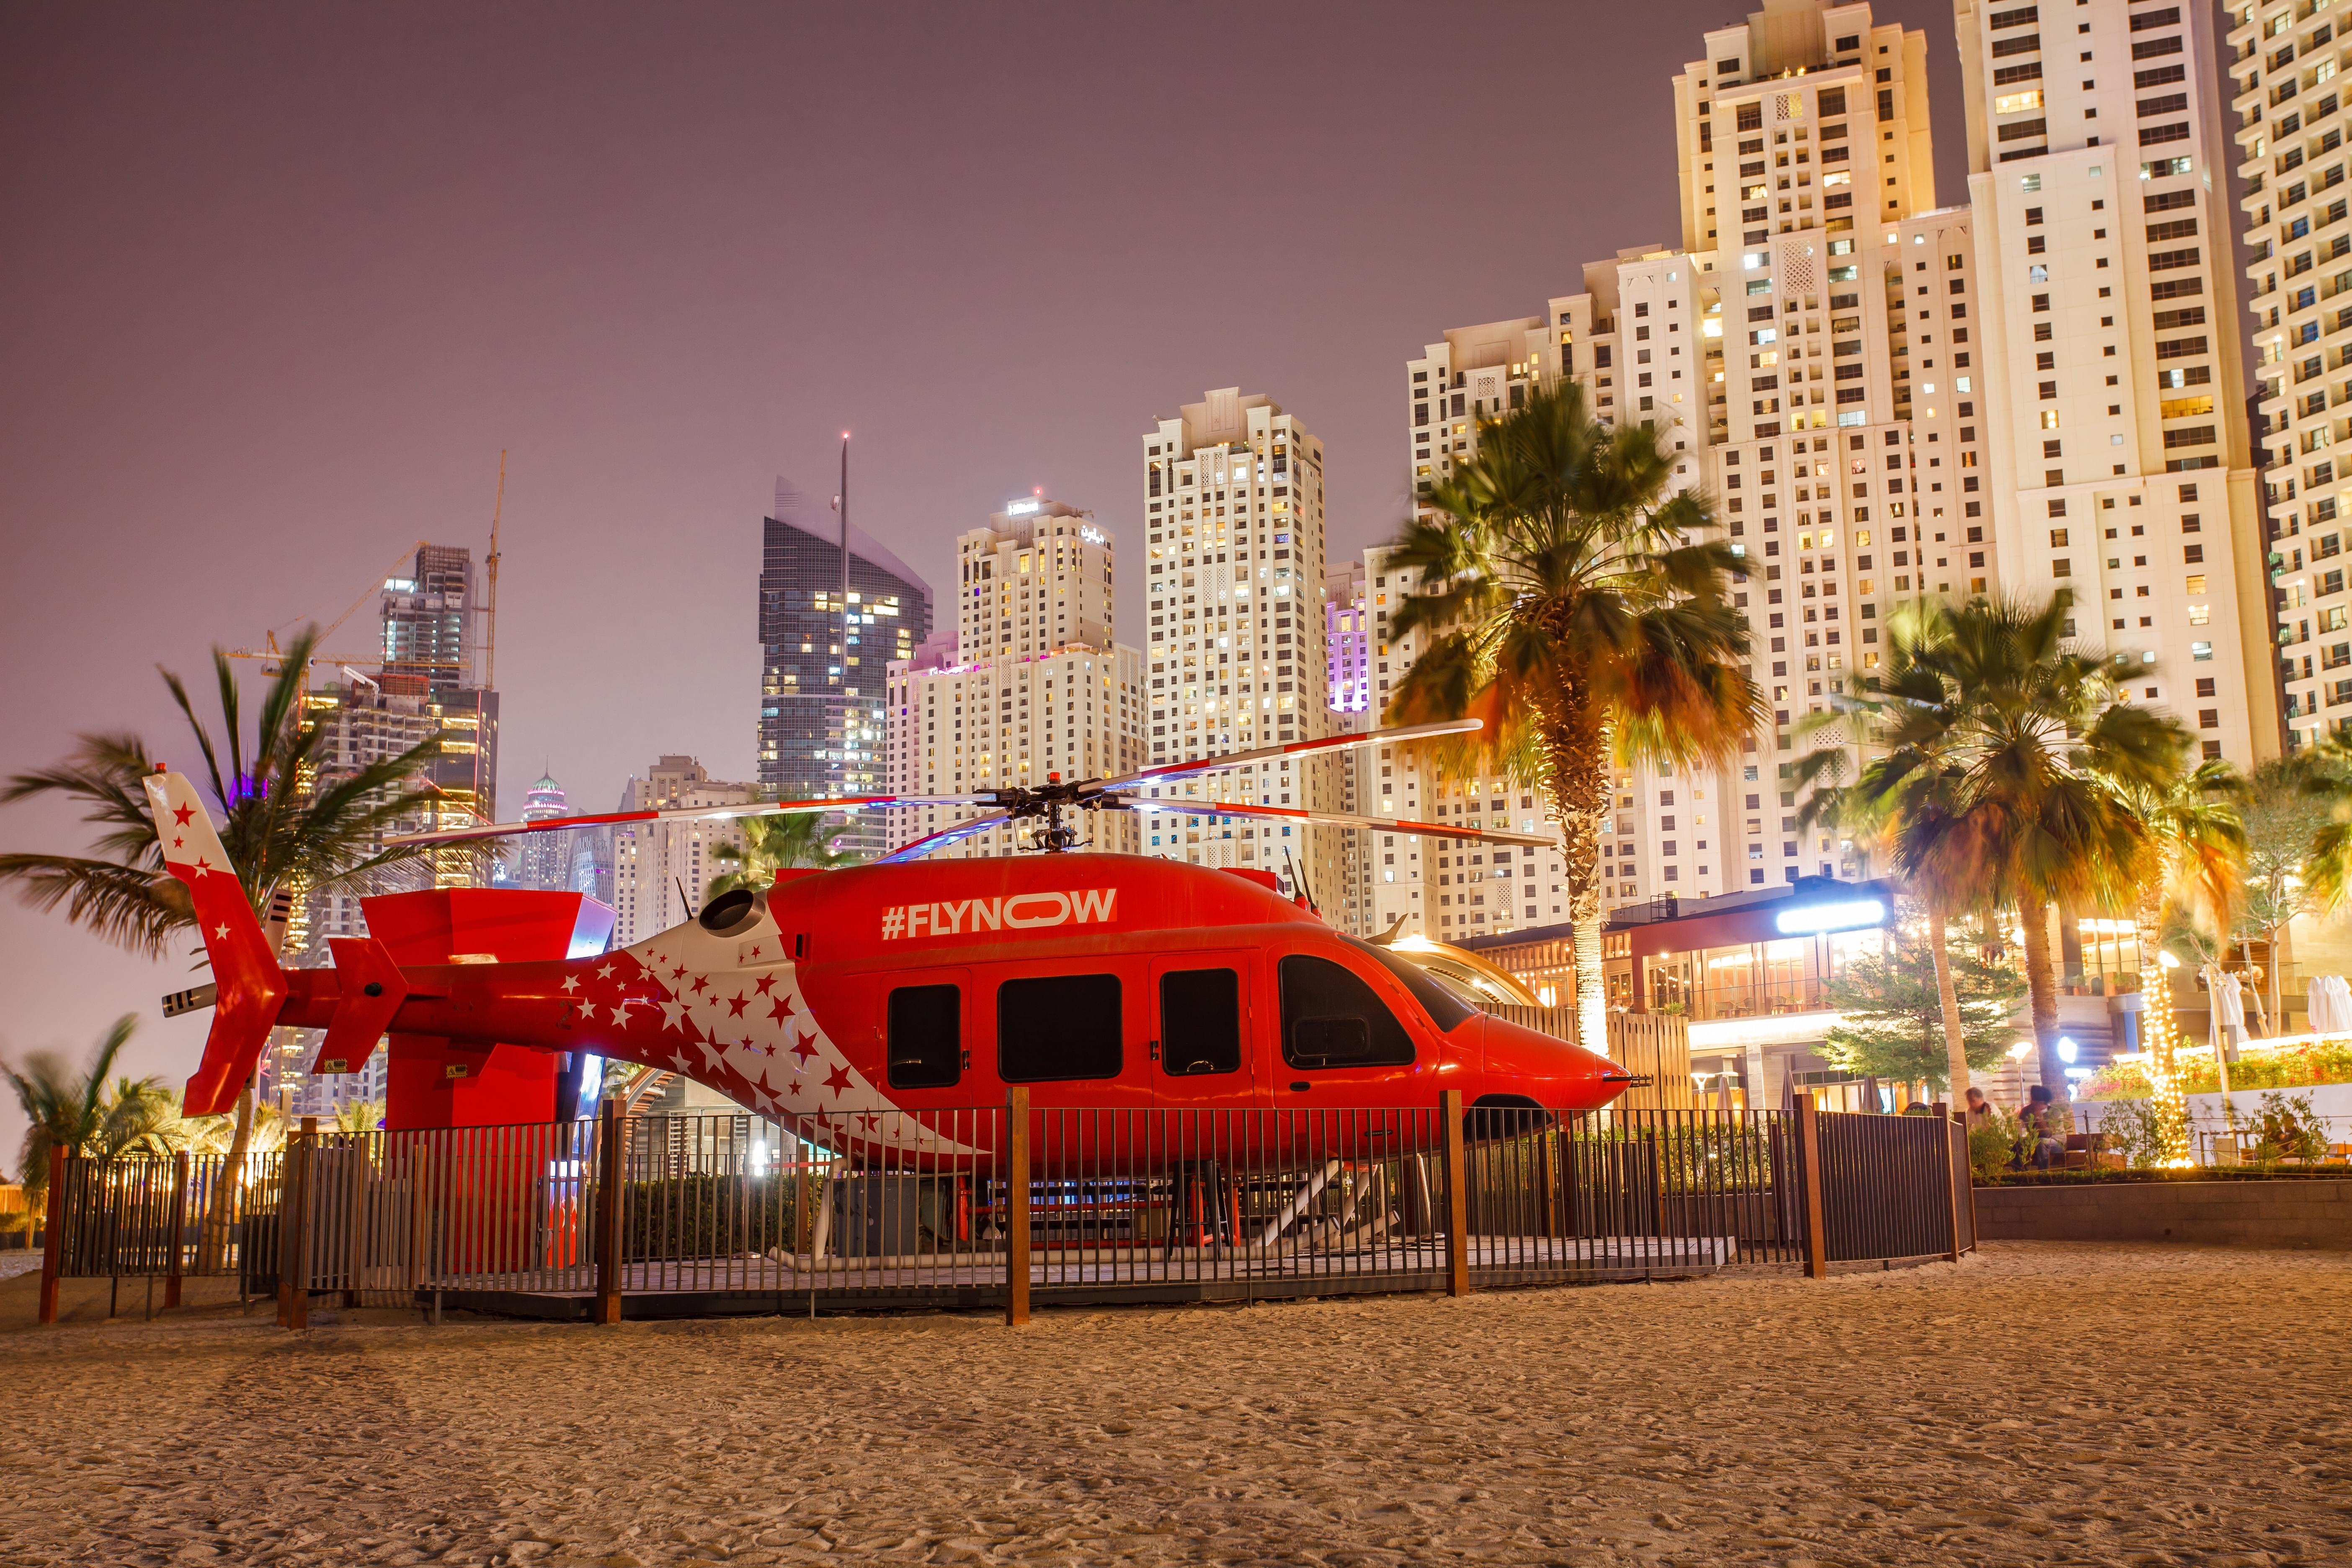 Helicopter Tours in Dubai